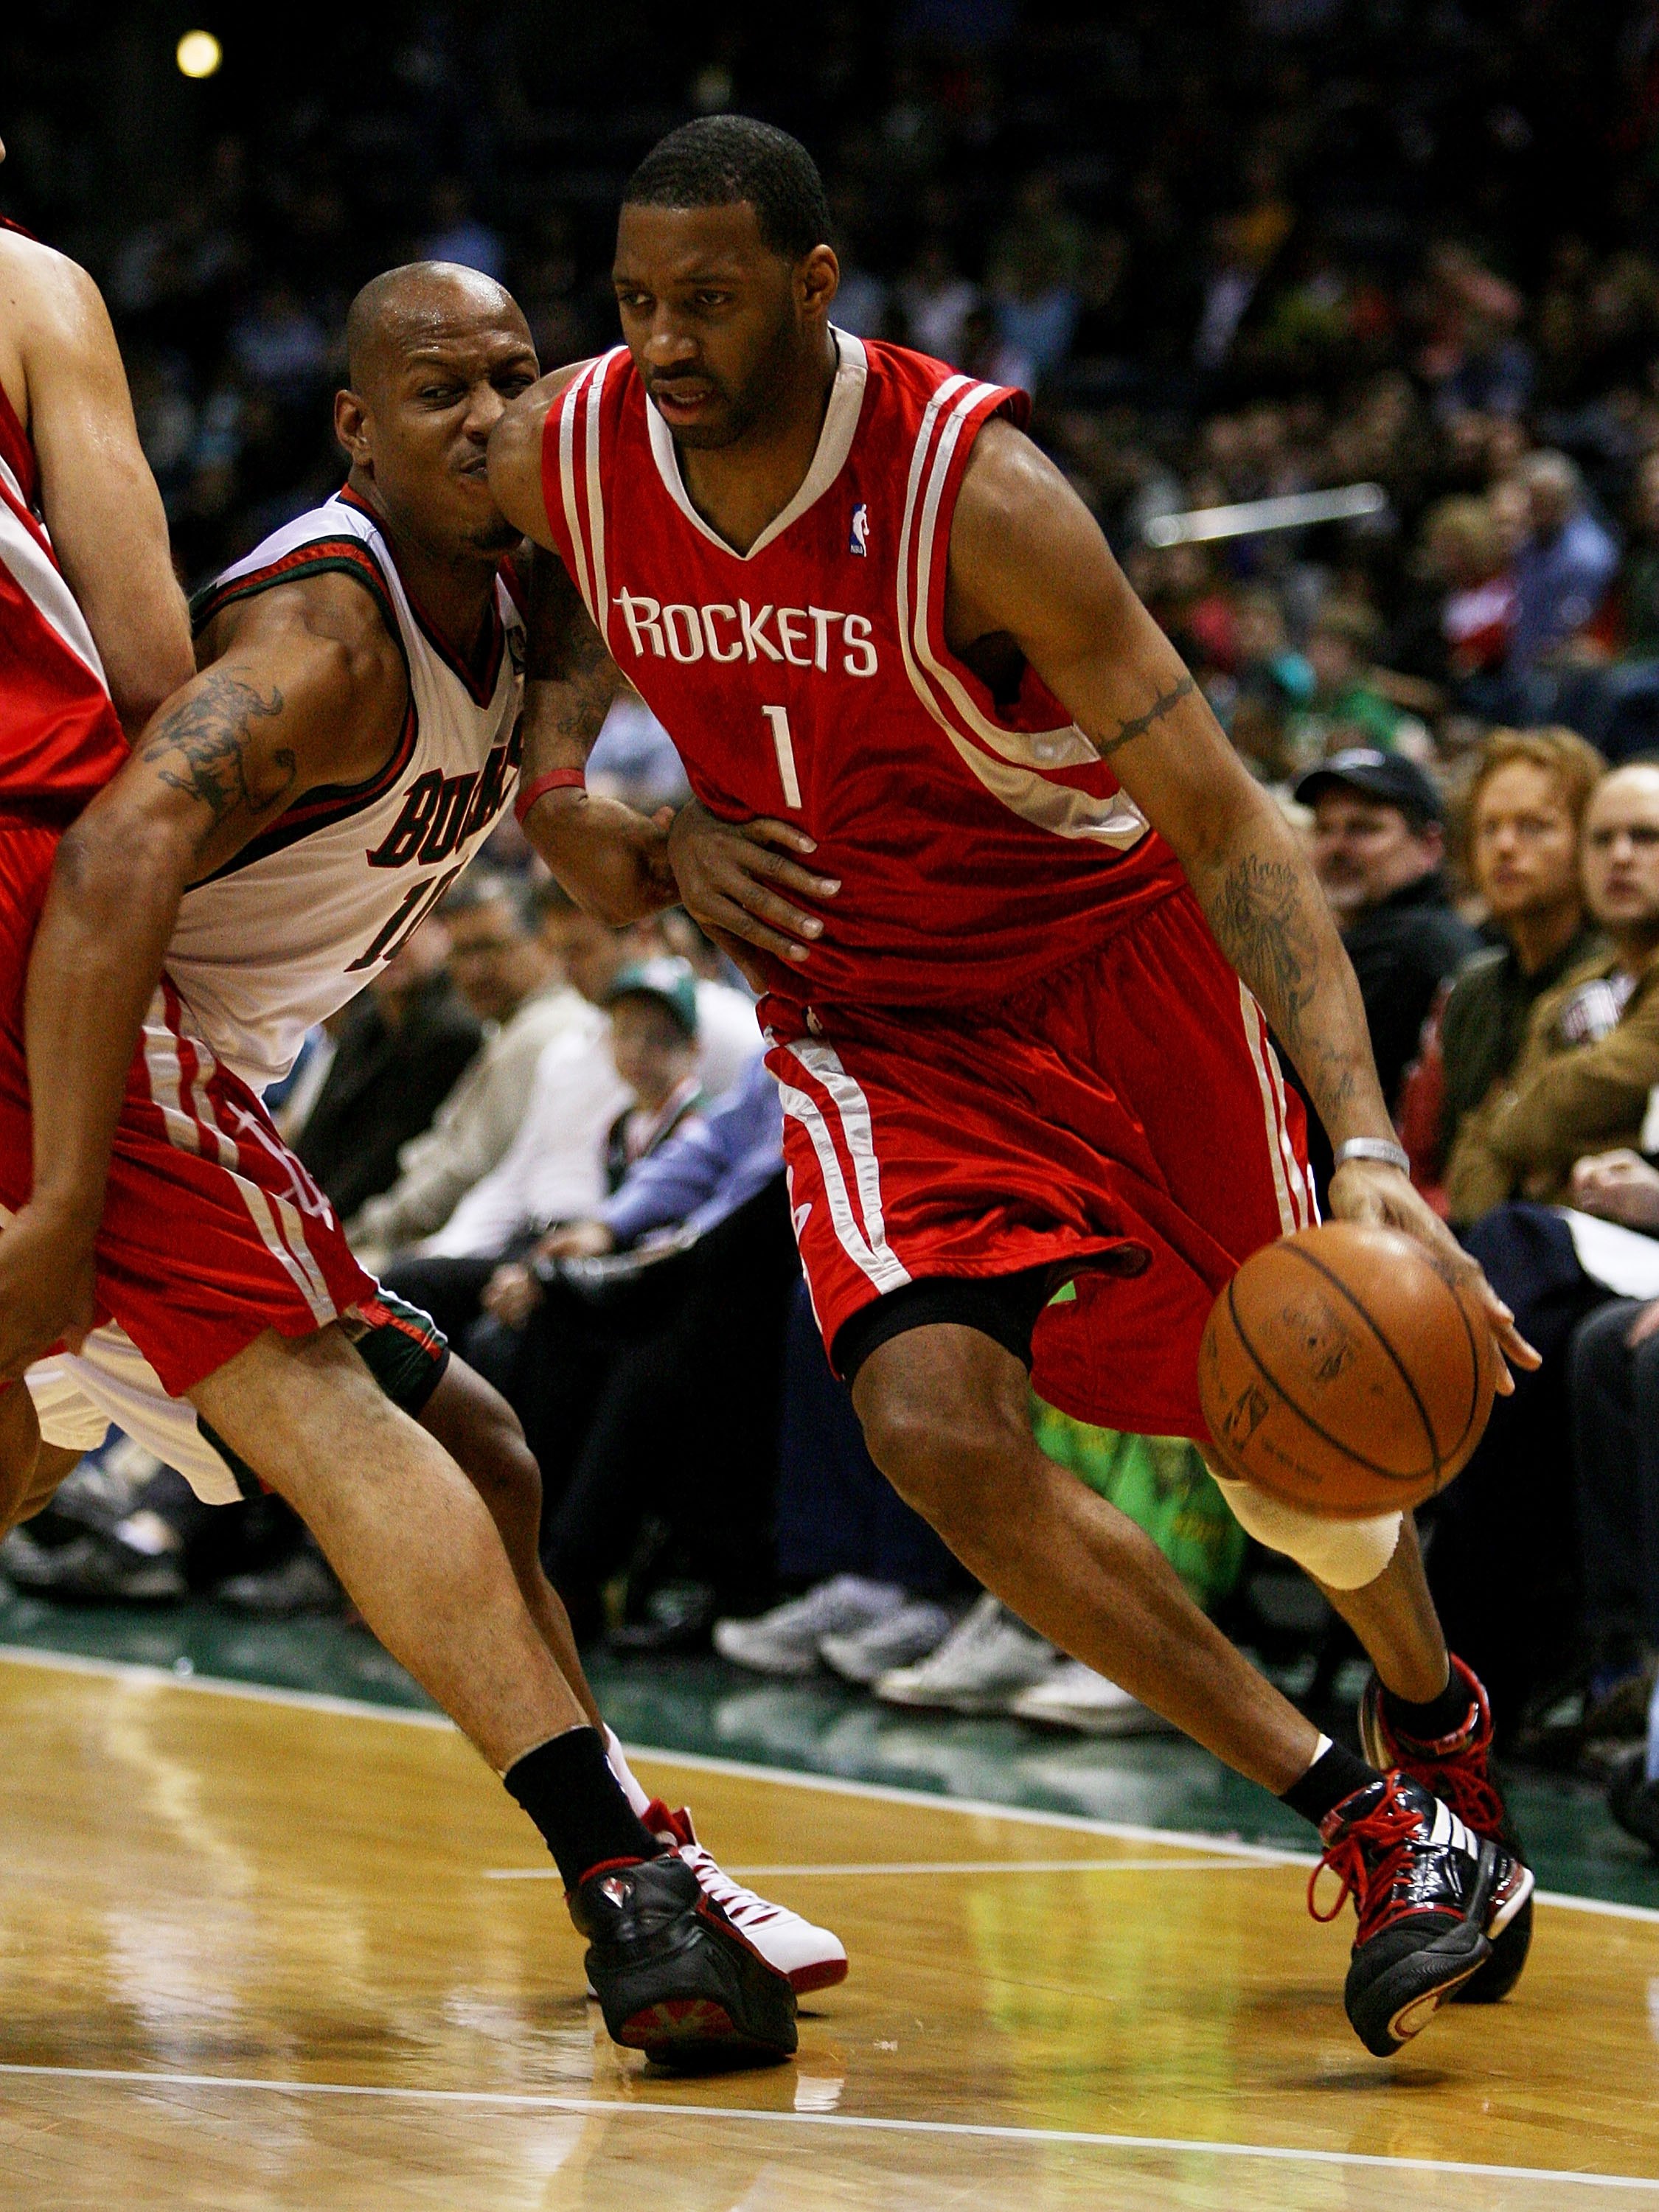 MILWAUKEE - FEBRUARY 09: Tracy McGrady #1 of the Houston Rockets collides with Keith Bogans #10 of the Milwaukee Bucks on a screen set by Yao Ming #11 on February 9, 2009 at the Bradley Center in Milwaukee, Wisconsin. The Bucks defeated the Rockets 124-11